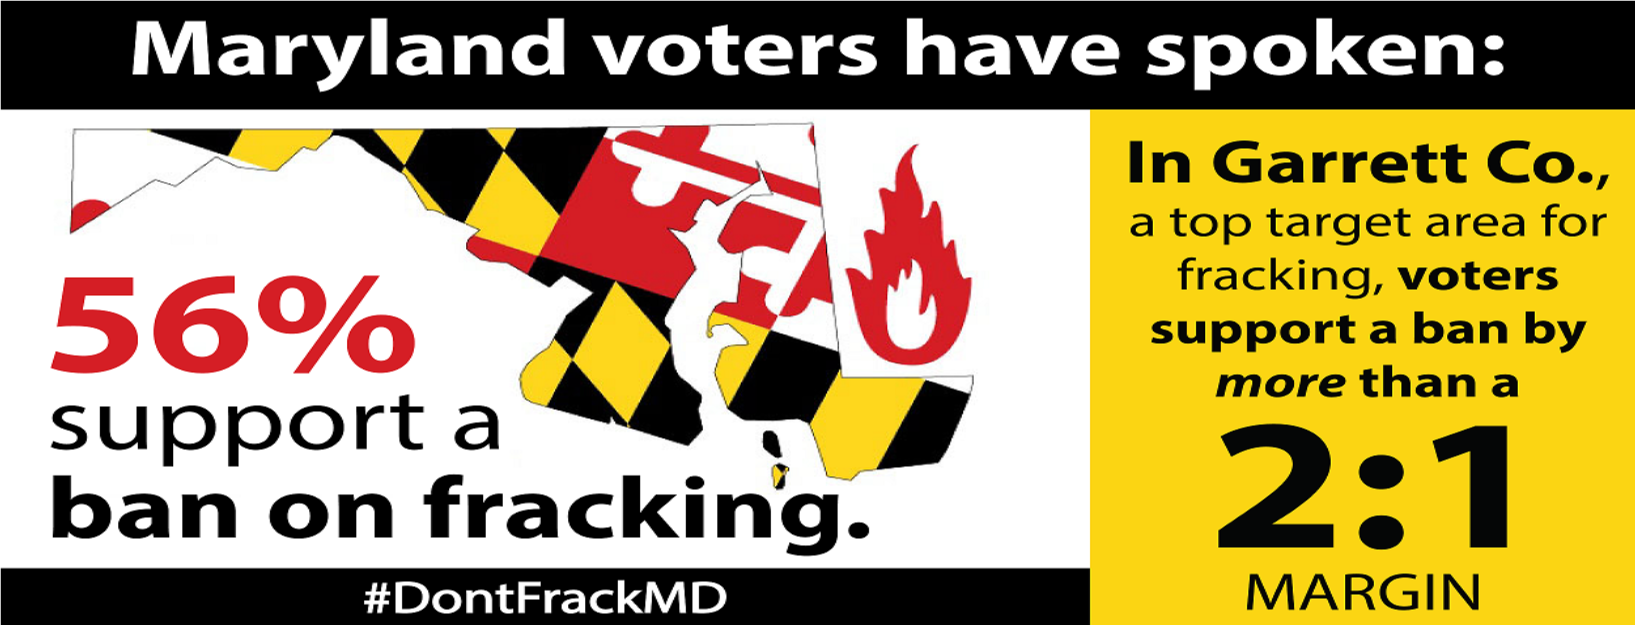 Maryland fracking polling results, 2016